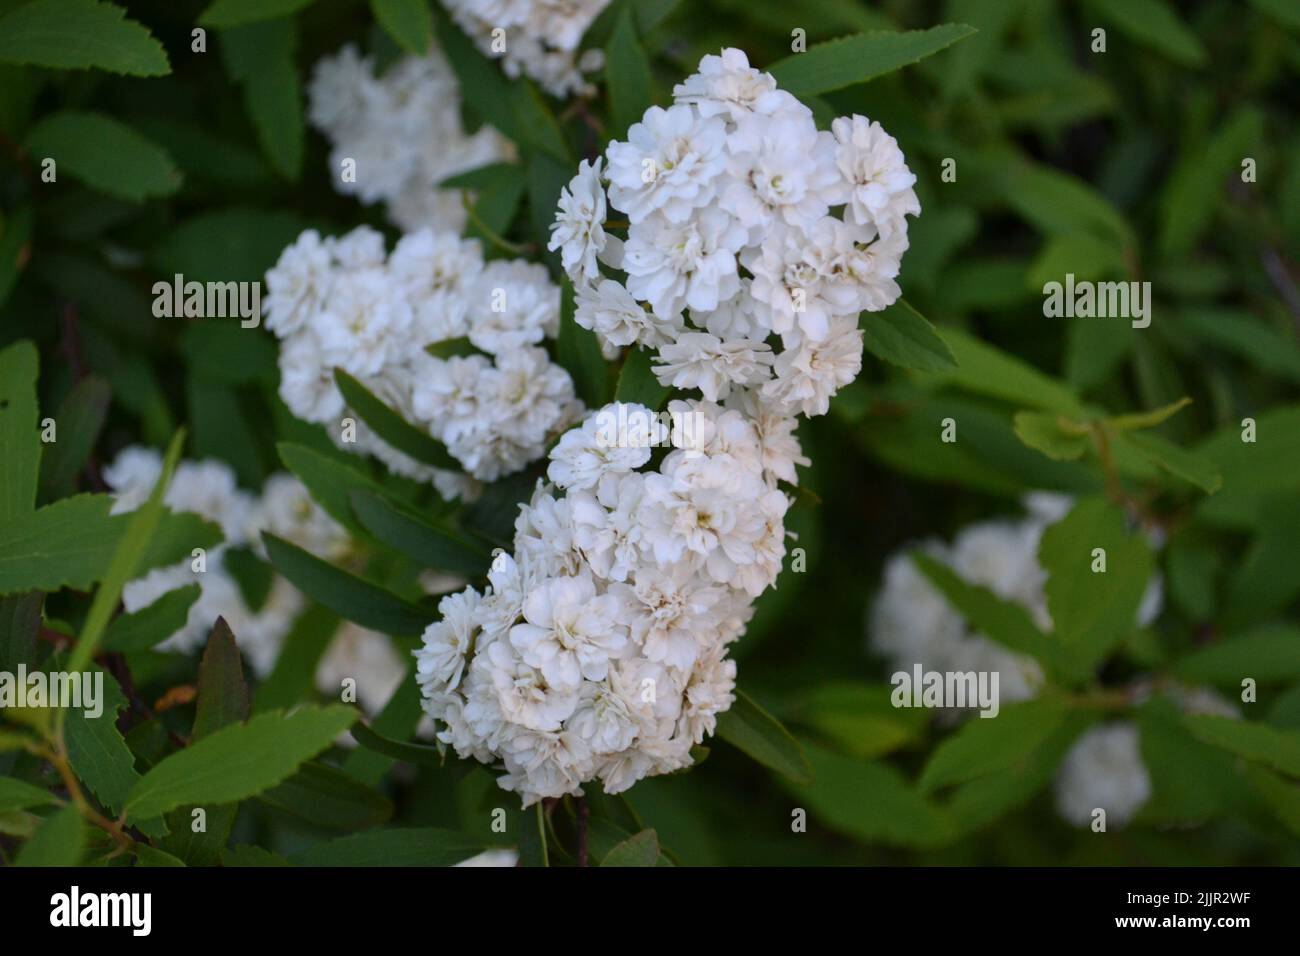 A low-growing shrub with many beautiful double white flowers. Stock Photo